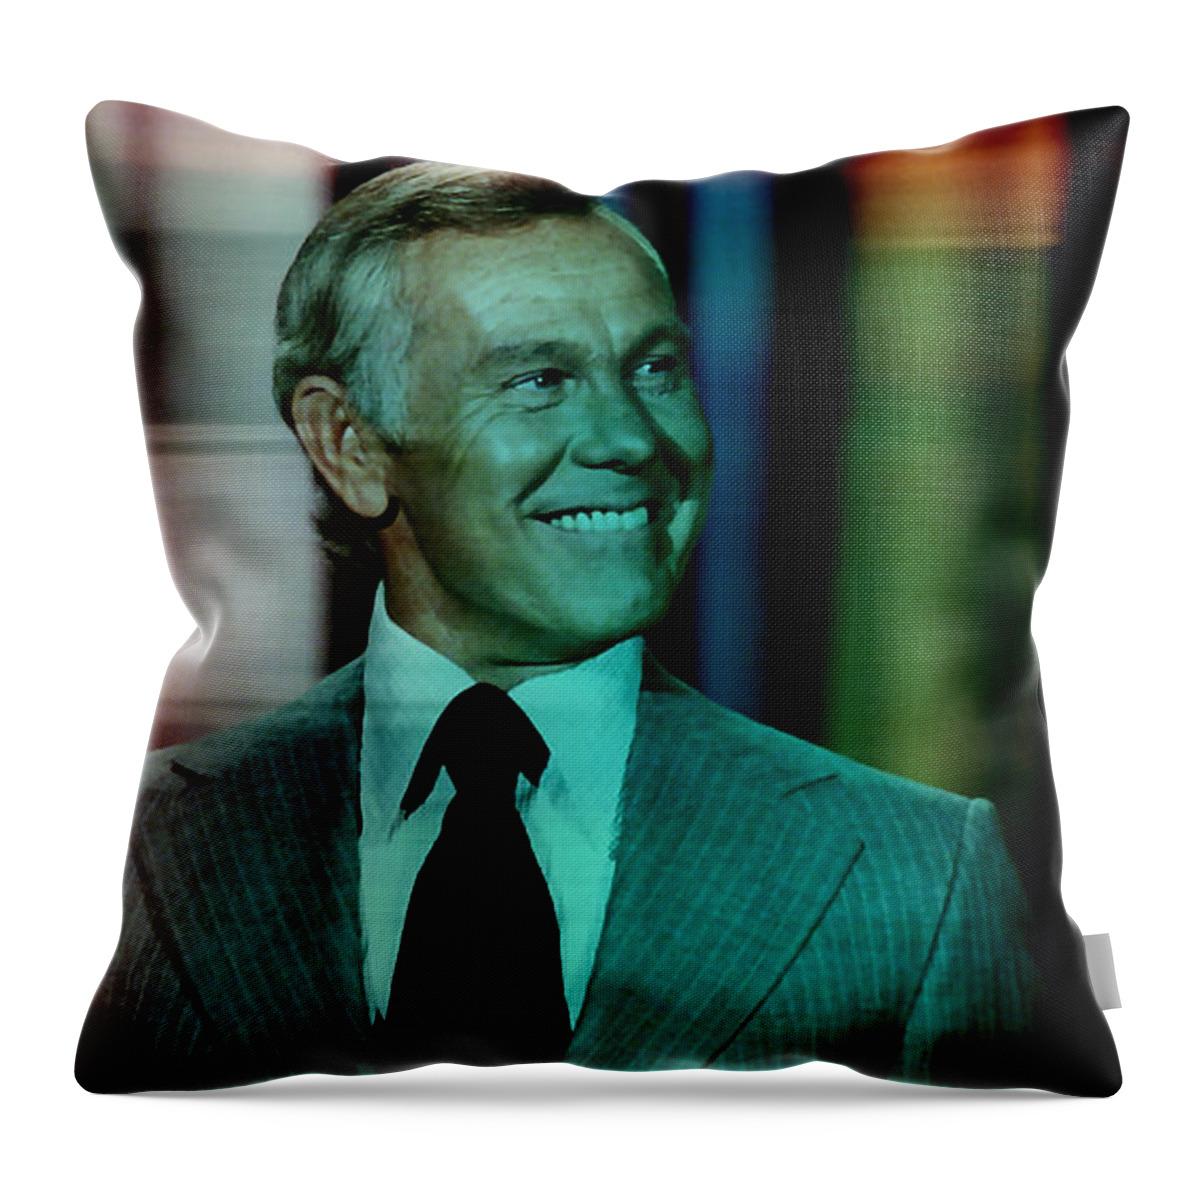 Johnny Carson Photographs Throw Pillow featuring the mixed media Johnny Carson by Marvin Blaine